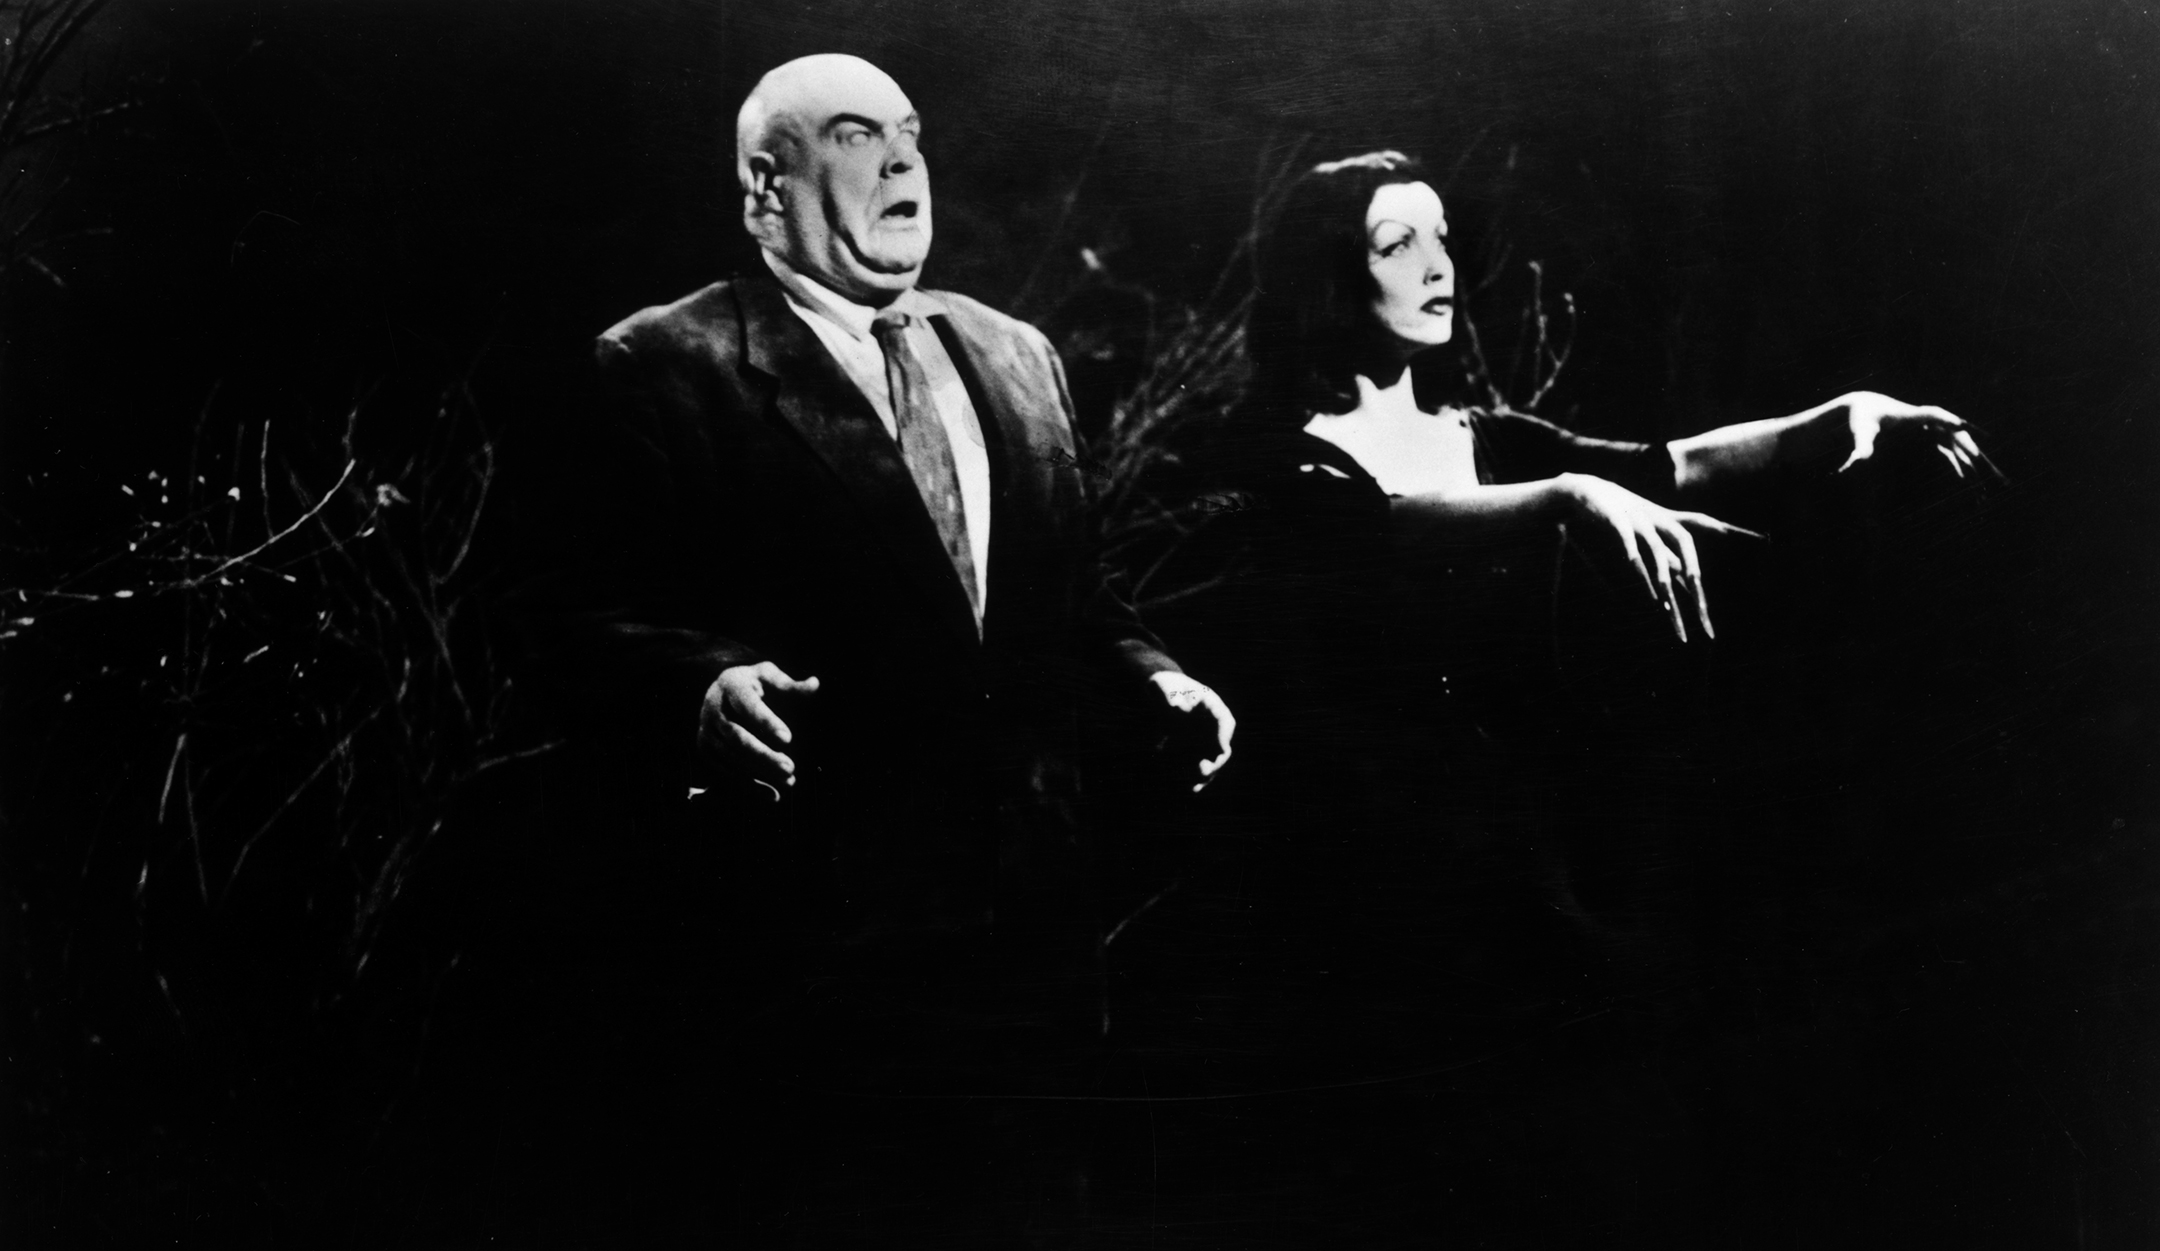 Black and white still image from plan nine from outer space depicting a bald man and a lithe woman walking like zombies